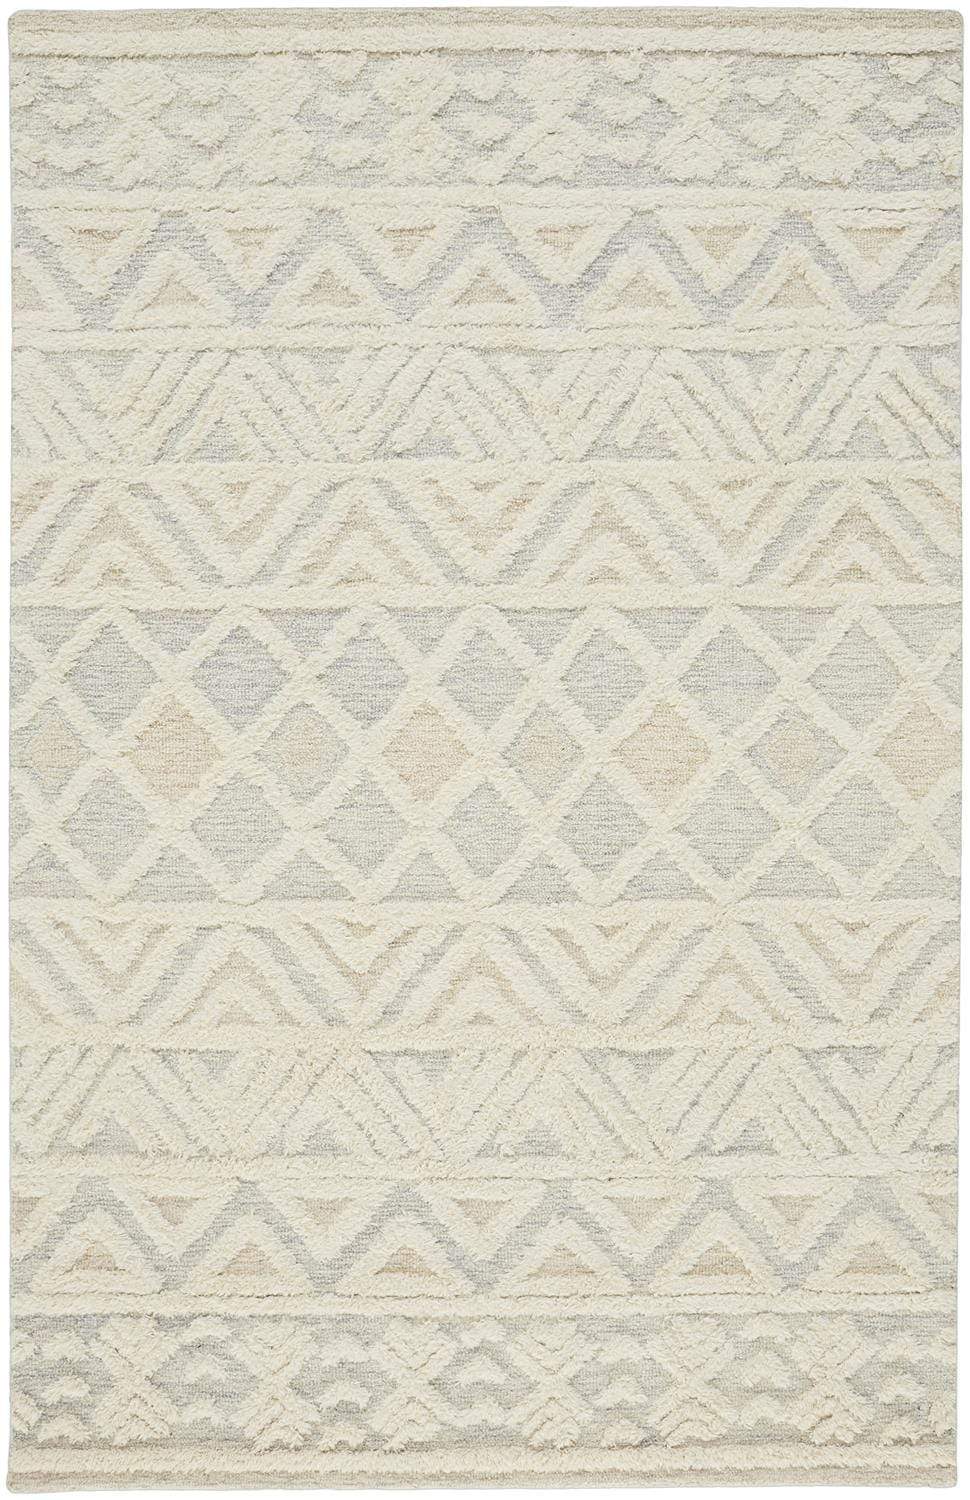 Feizy Feizy Anica Moroccan Style Wool Tufted Rug - Ivory & Chambray Blue - Available in 6 Sizes 4' x 6' ANC8005FBLU000C00